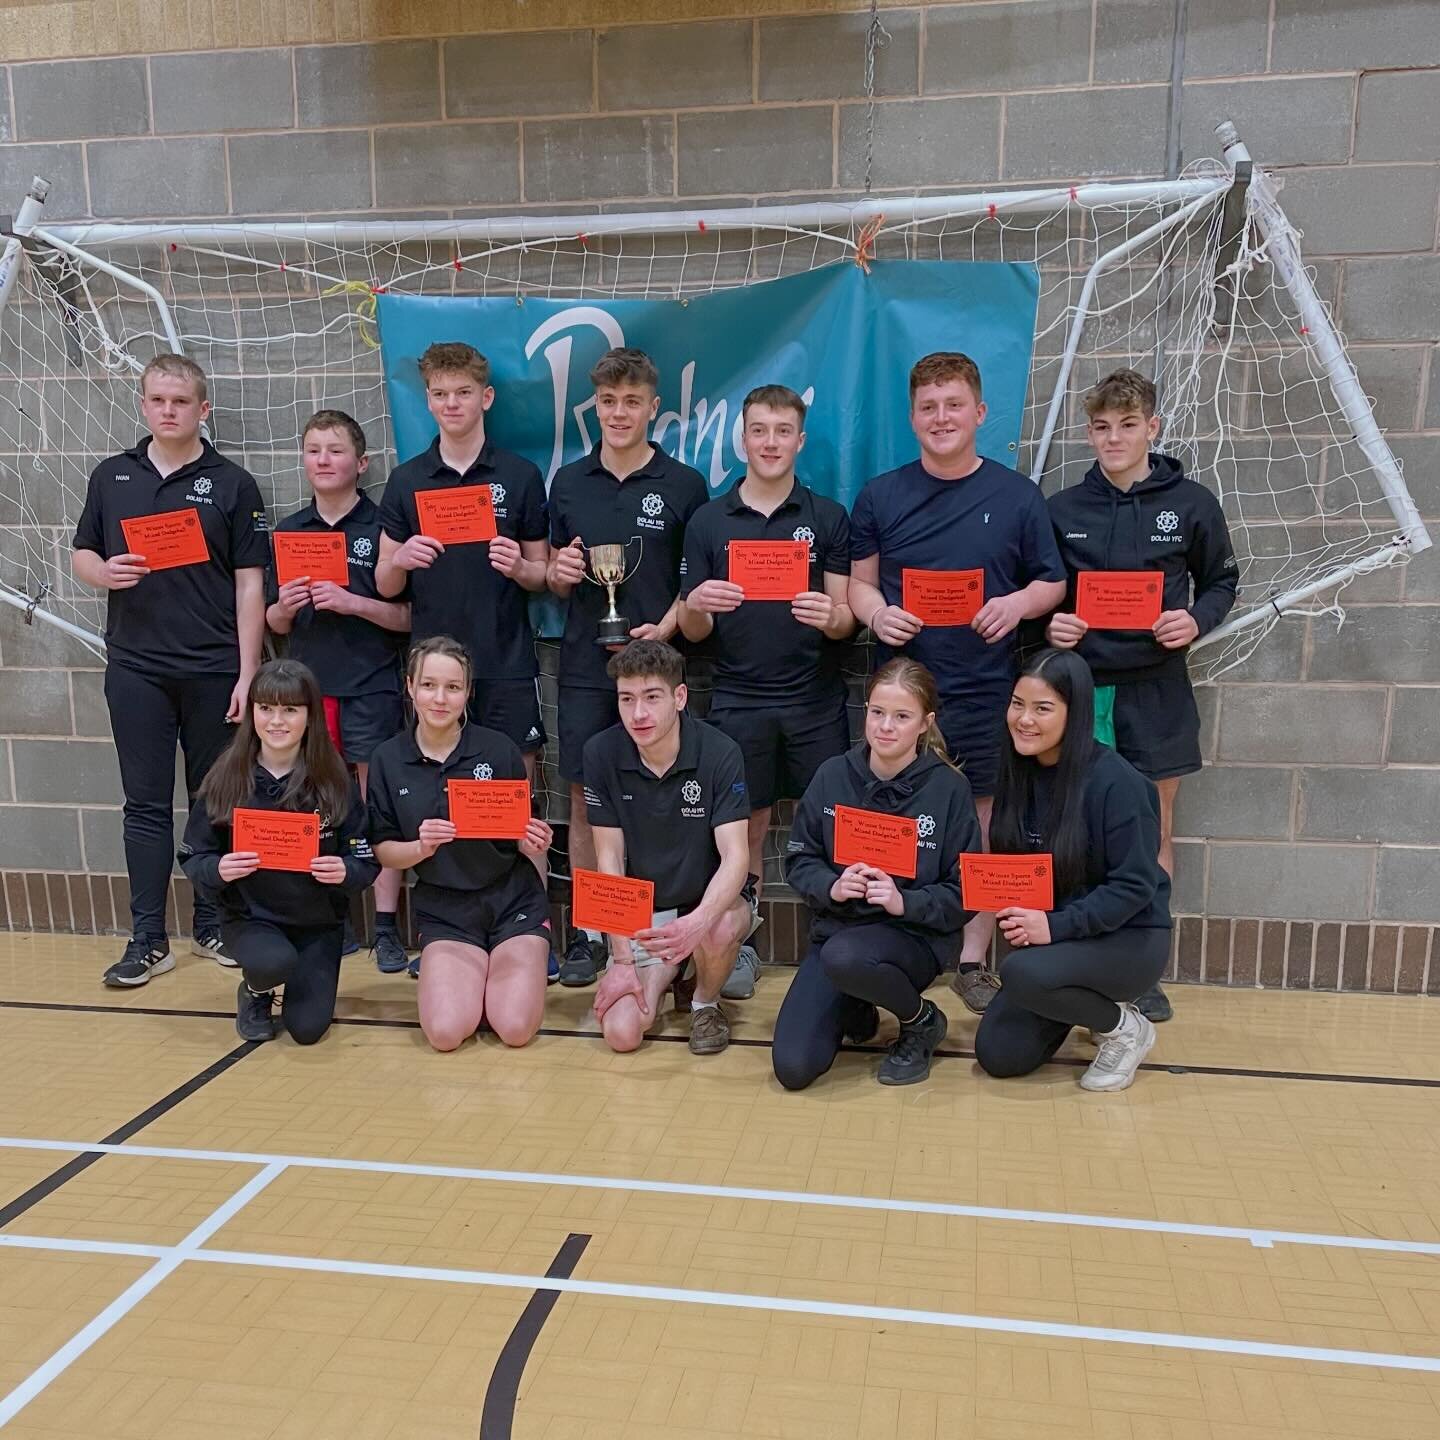 🏆❄️WINTER SPORTS LEAGUE ❄️🏆
After 6 weeks of dodgeball the top 4 teams played a finals night. 
Well done to all teams who entered 🏐
Congratulations to Dolau YFC who took home the trophy 👏🏻 
🥇Dolau YFC 
🥈Radnor Valley YFC 
🥉Knighton YFC 
🏅Edw